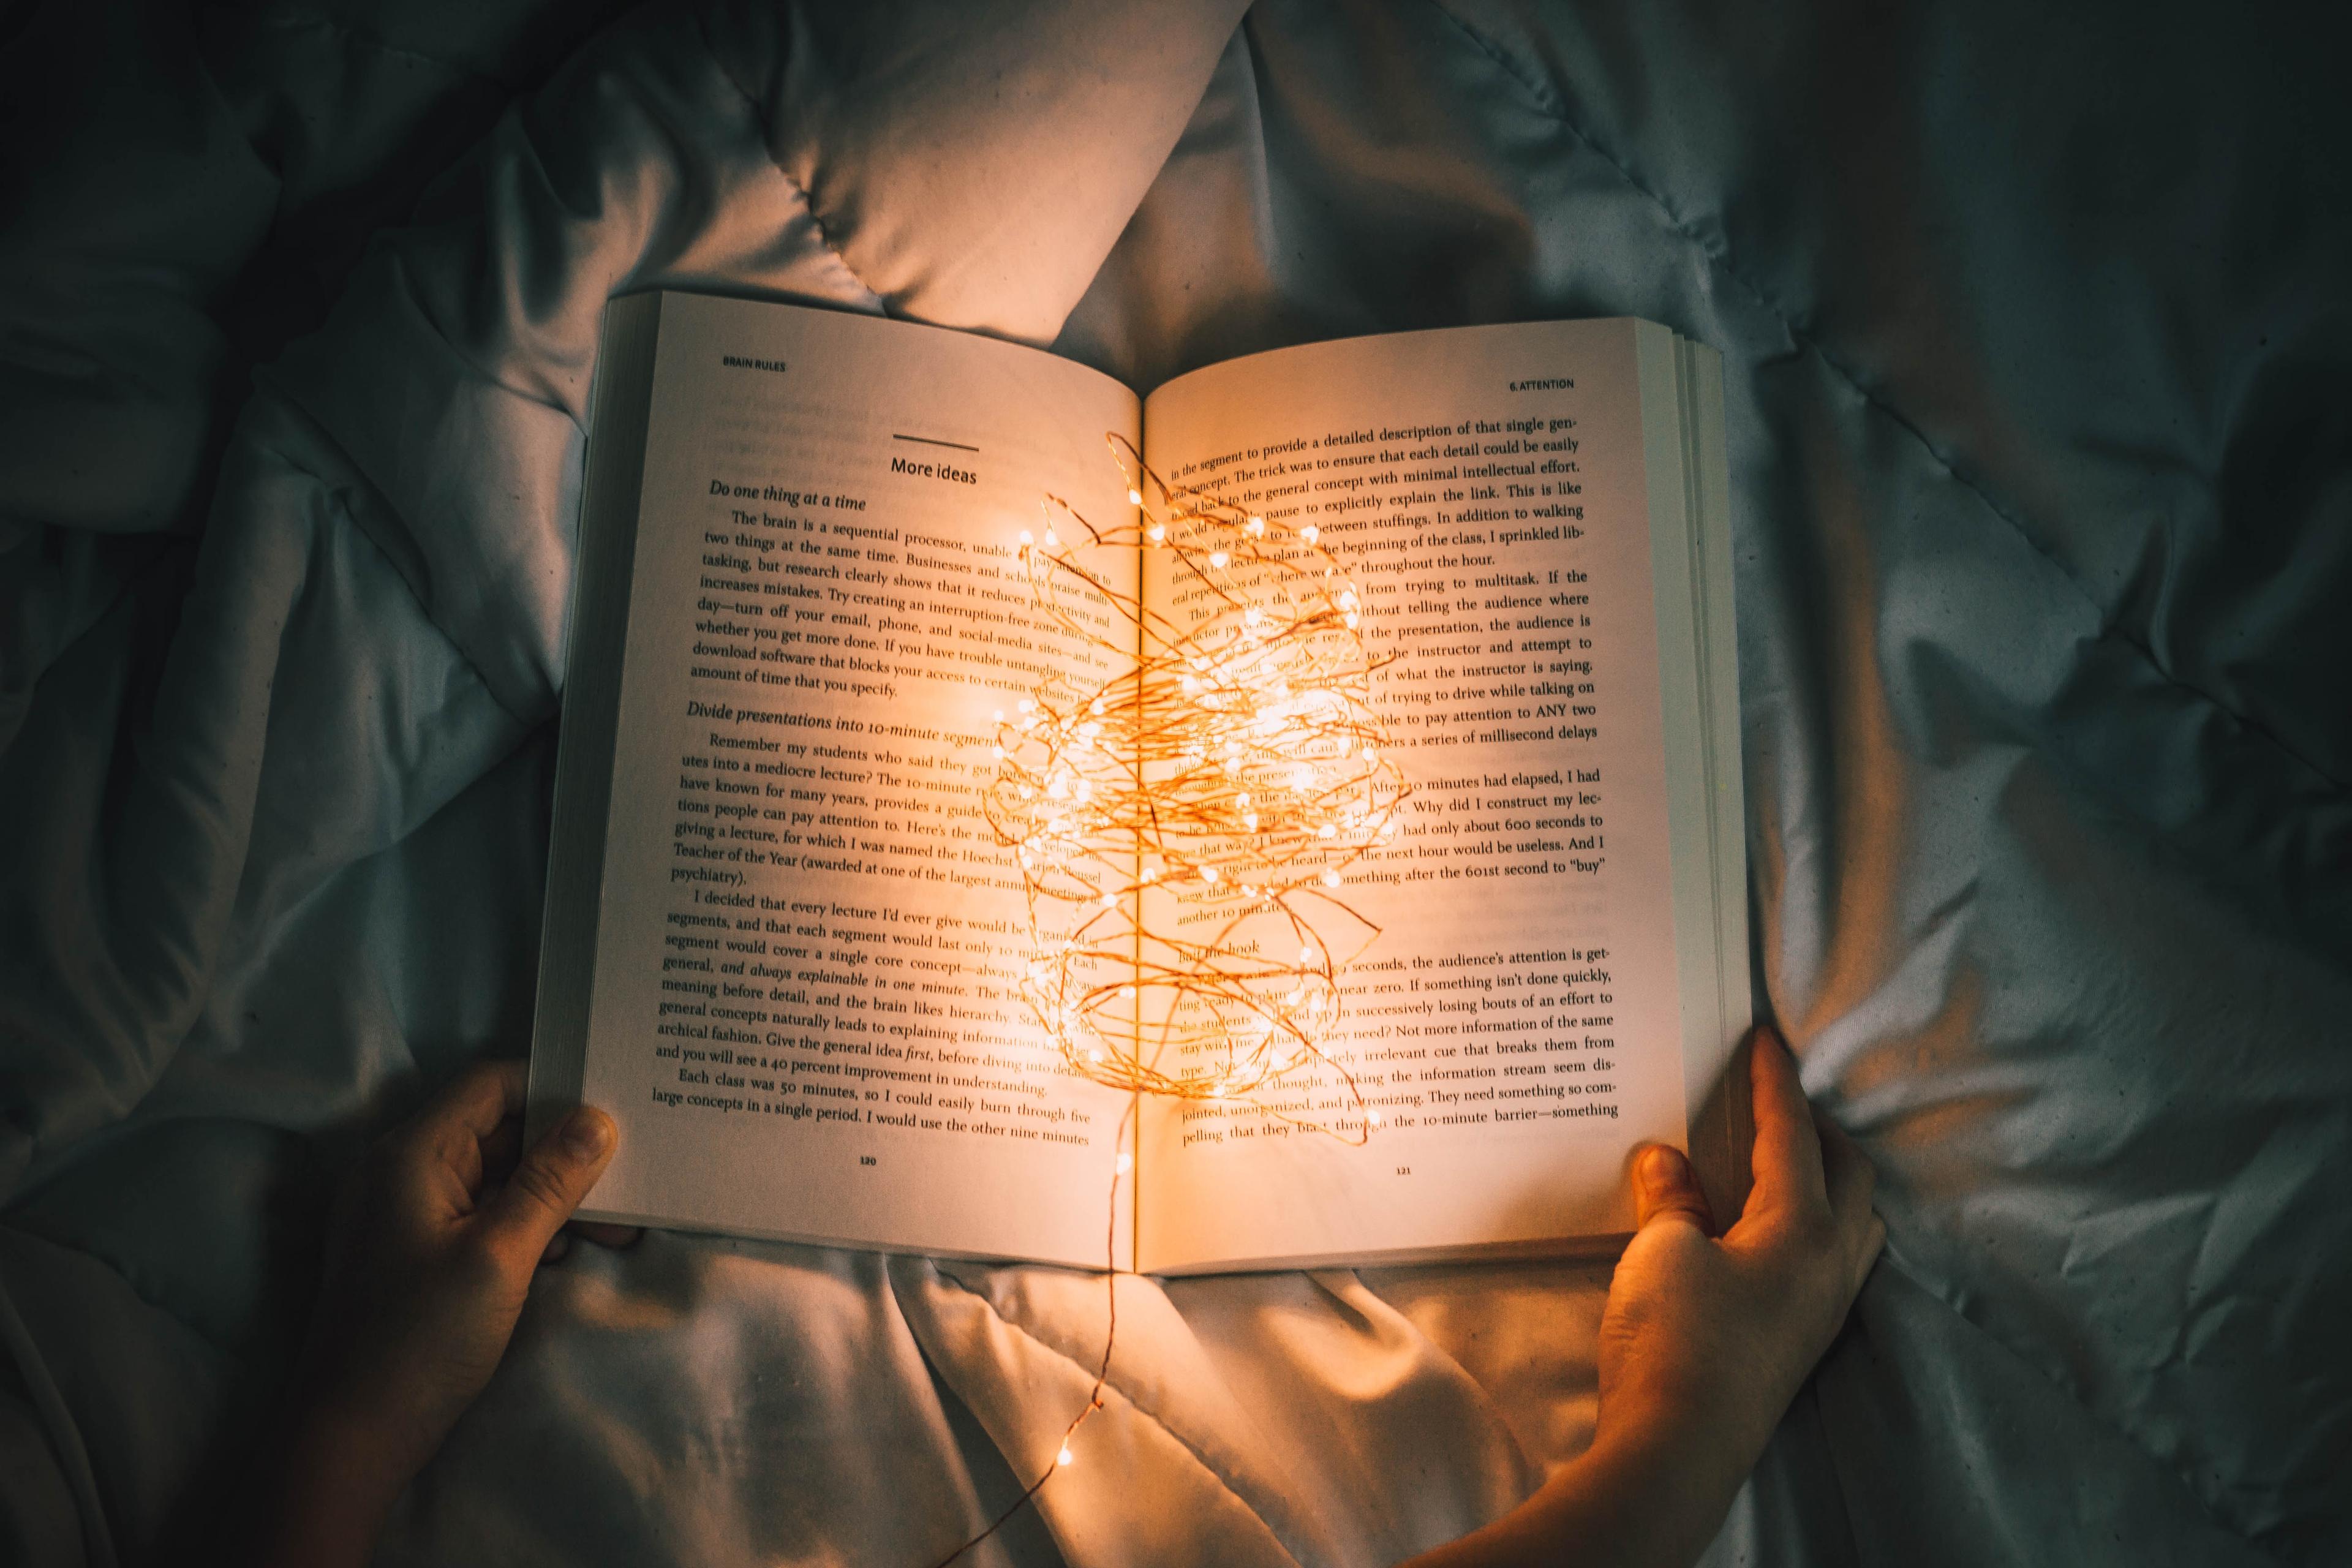 Hands holding an open book with a glowing string of fairy lights resting on the pages, atop a bed with grey sheets.